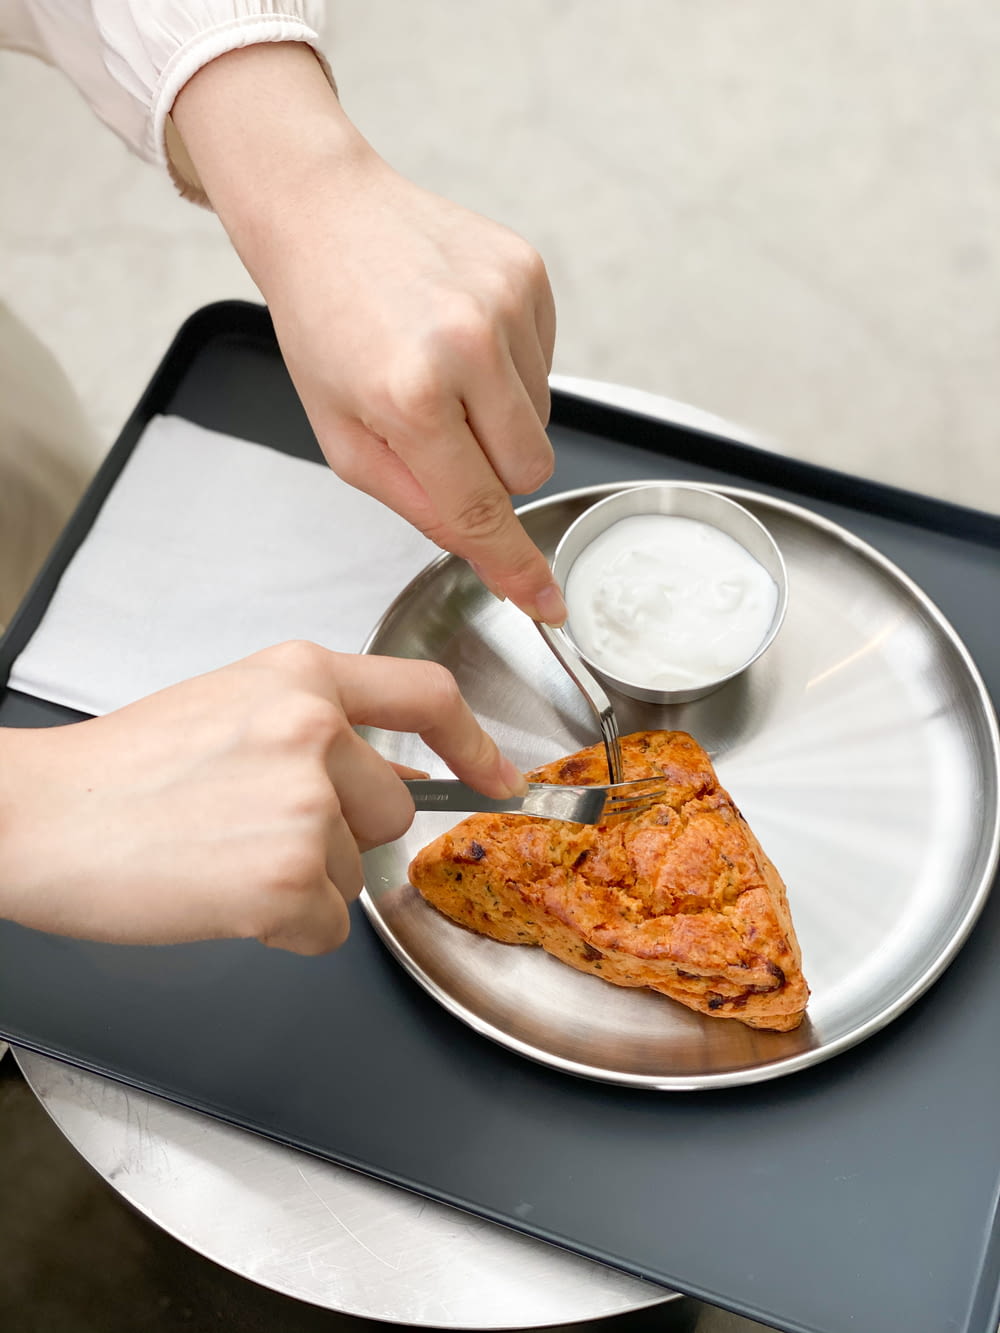 person holding stainless steel spoon and fork on white ceramic plate